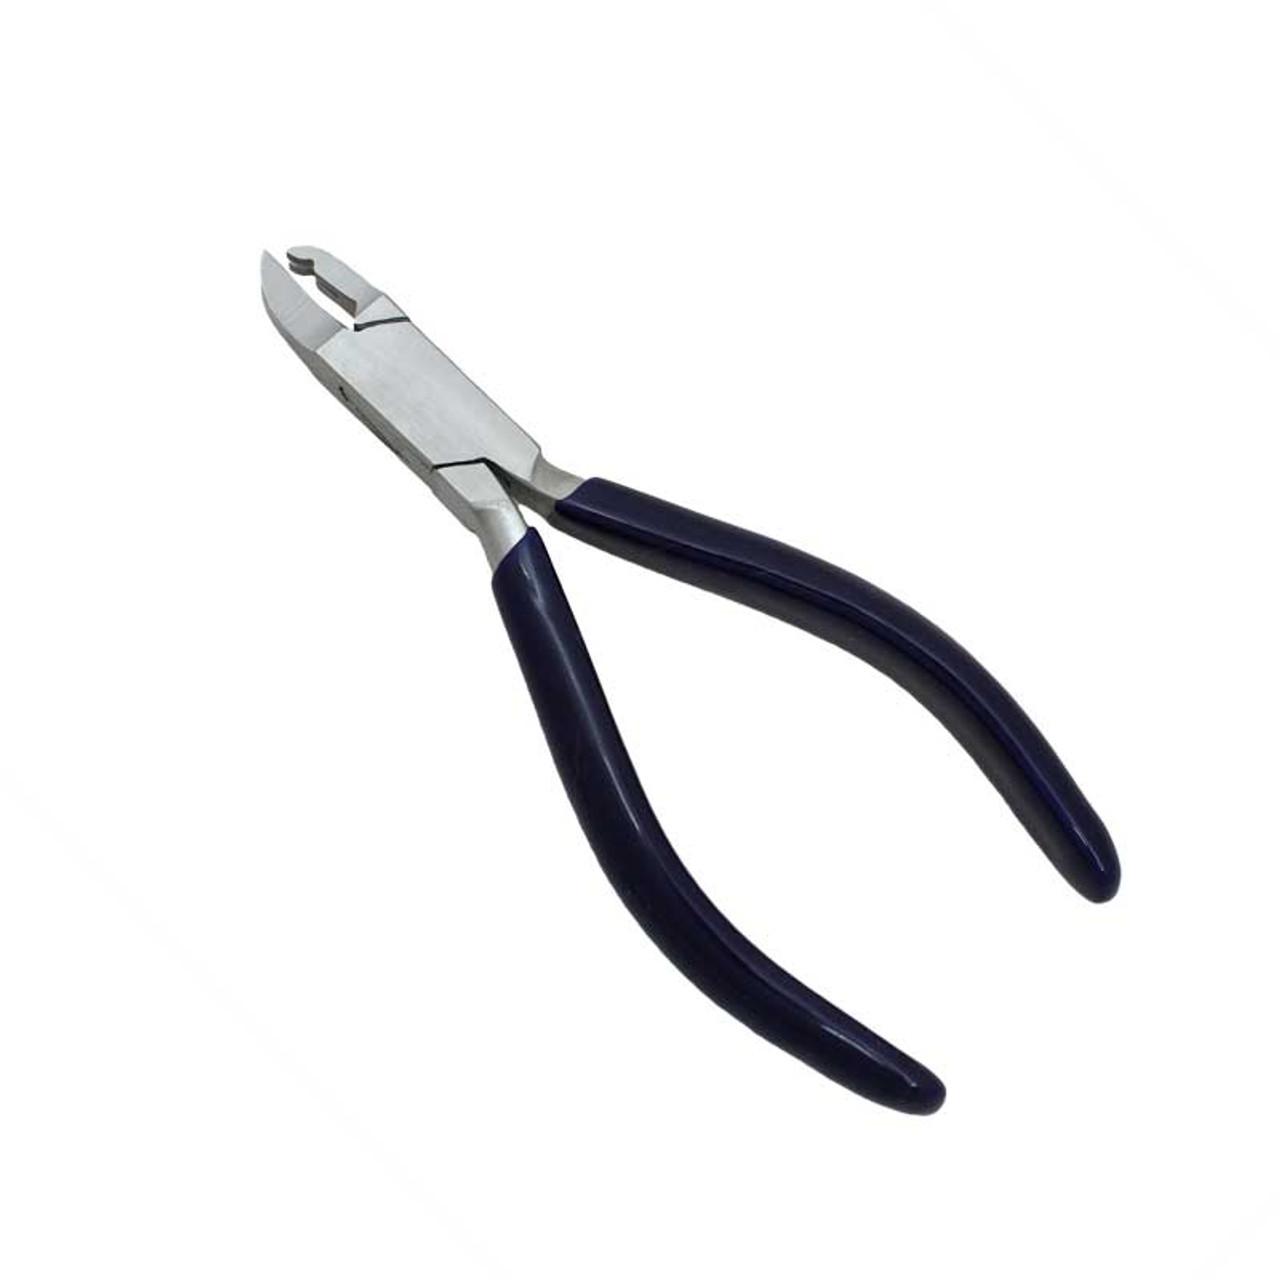 Chain Nose Pliers Molded Ridges Handles Jewelry Making Pliers Jewelry Tools.